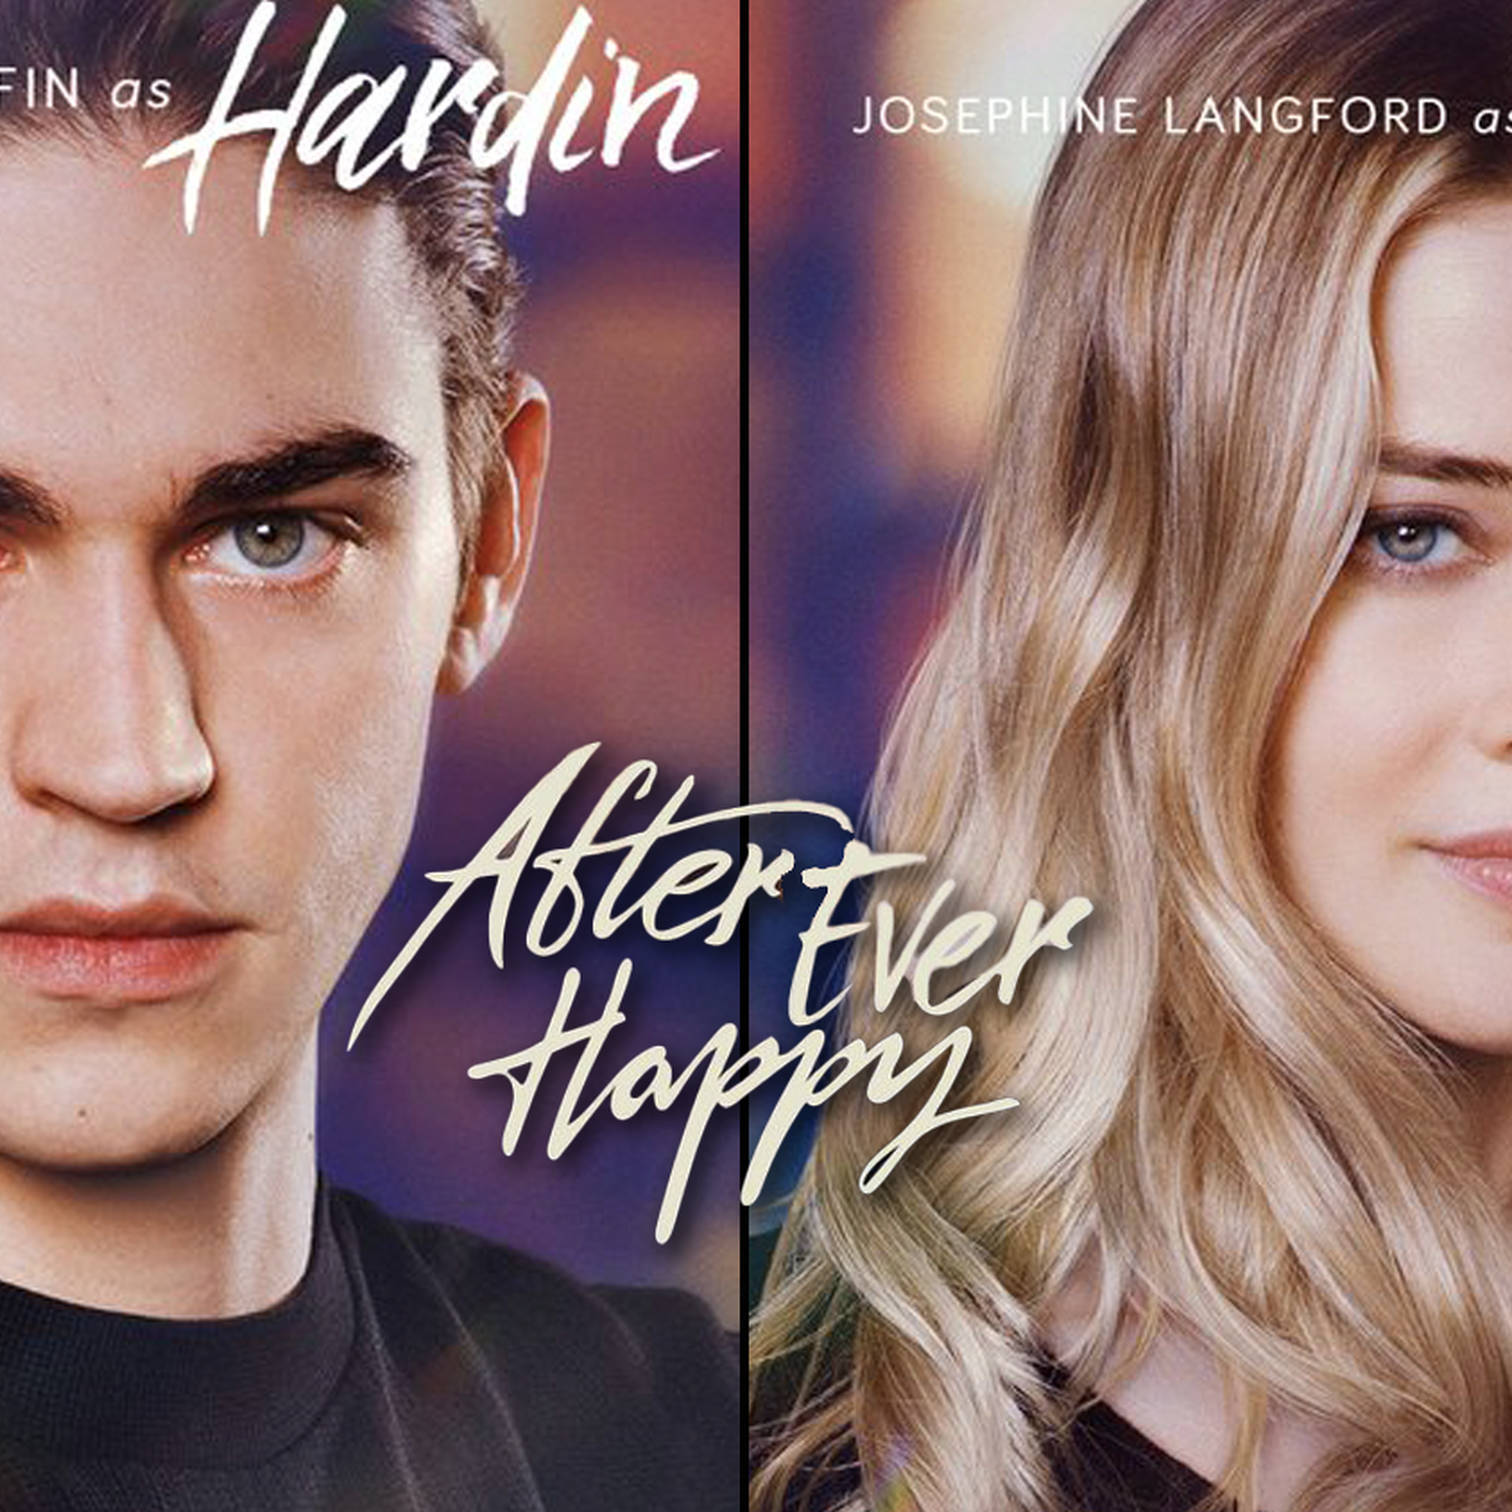 Hardin and Tessa - A Love Story from "After Ever Happy" Wallpaper